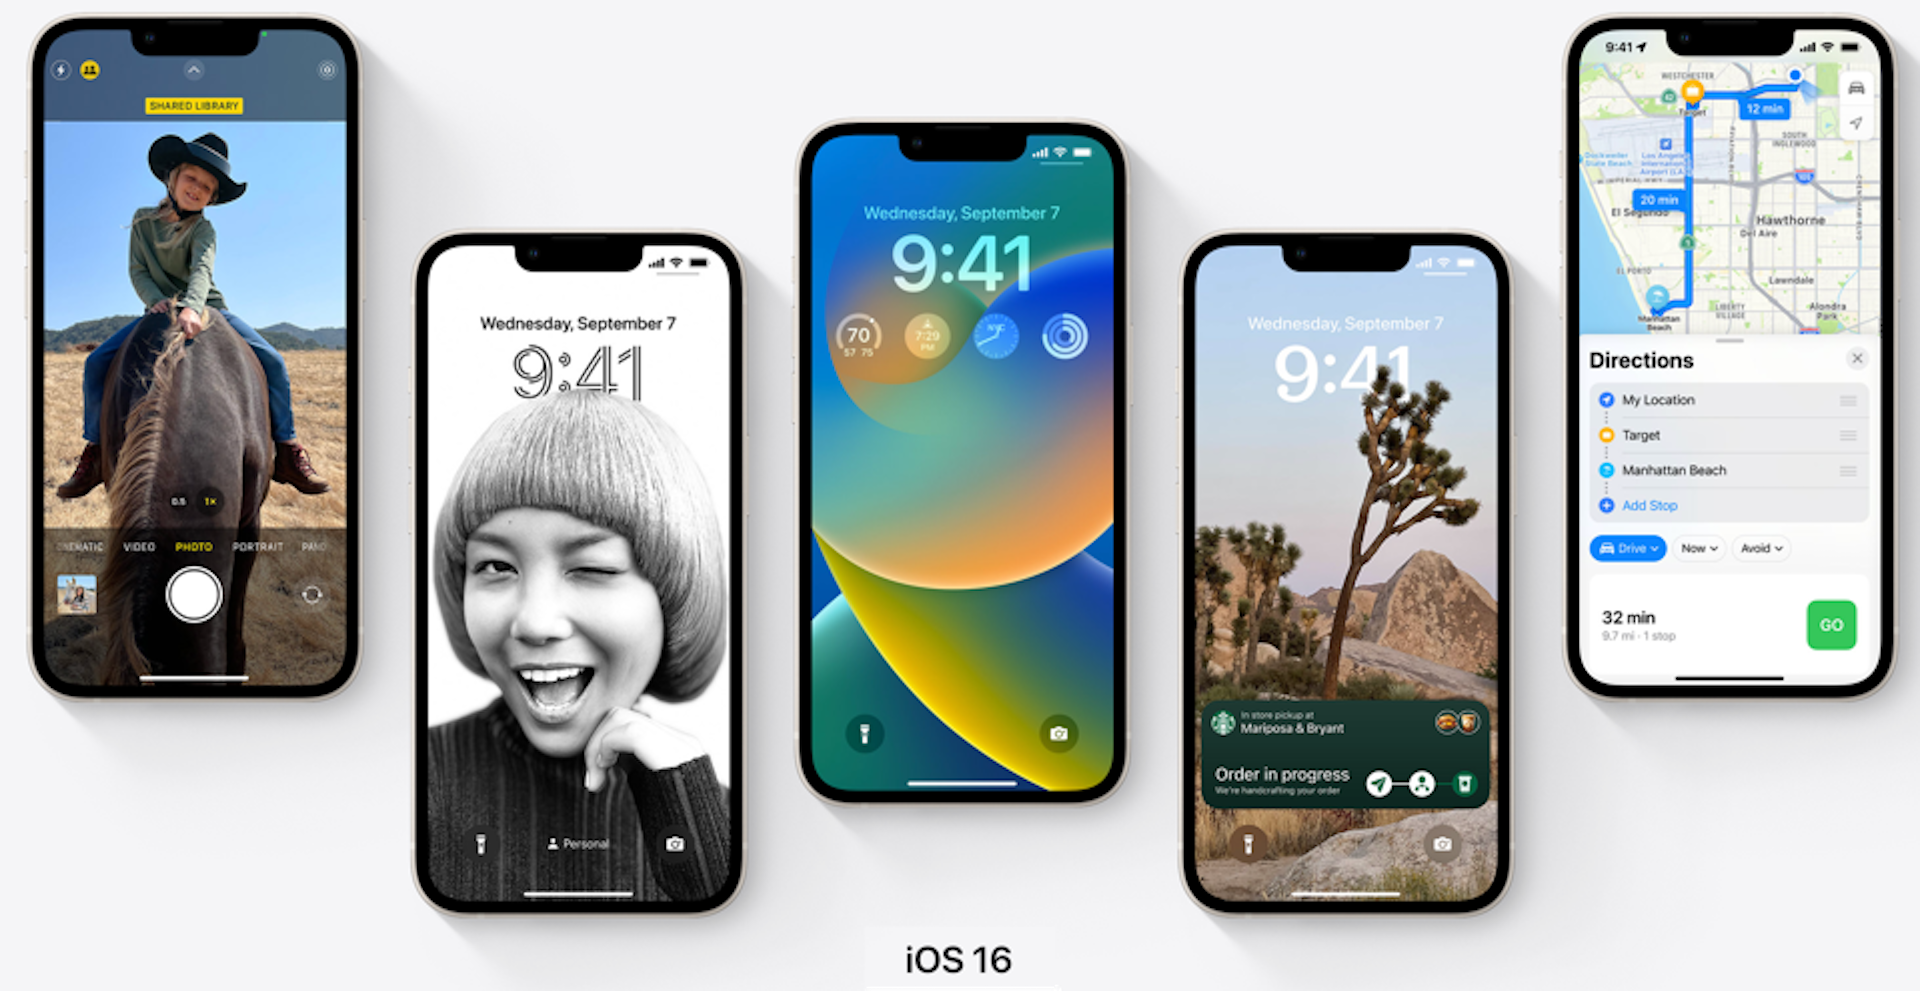 On September 12, Apple released the new iOS 16 update, which is available for all iPhones starting from the 8th generation to the new iPhone 14.